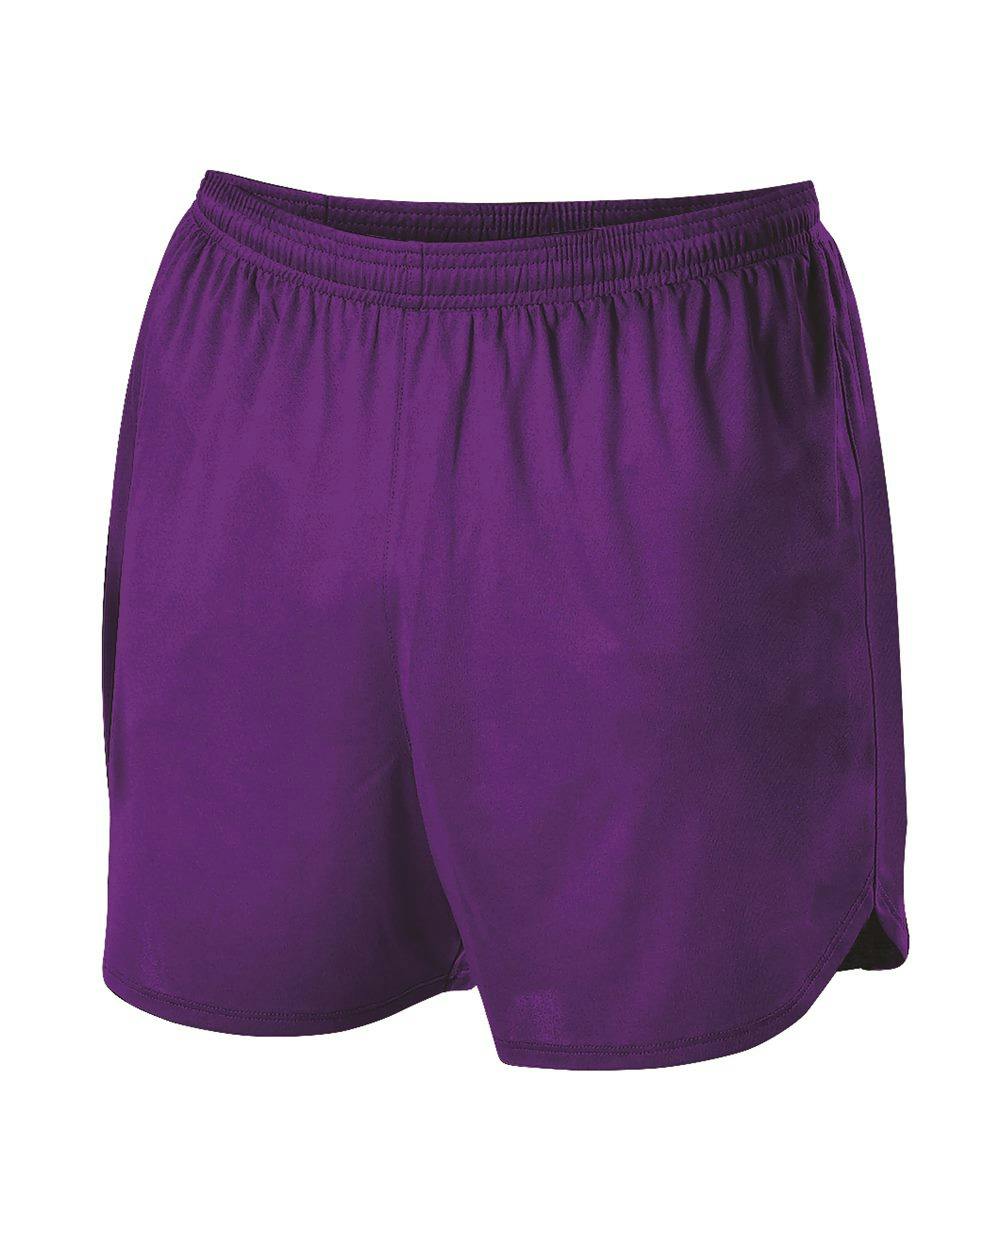 Image for Women's Woven Track Shorts - R3LFPW